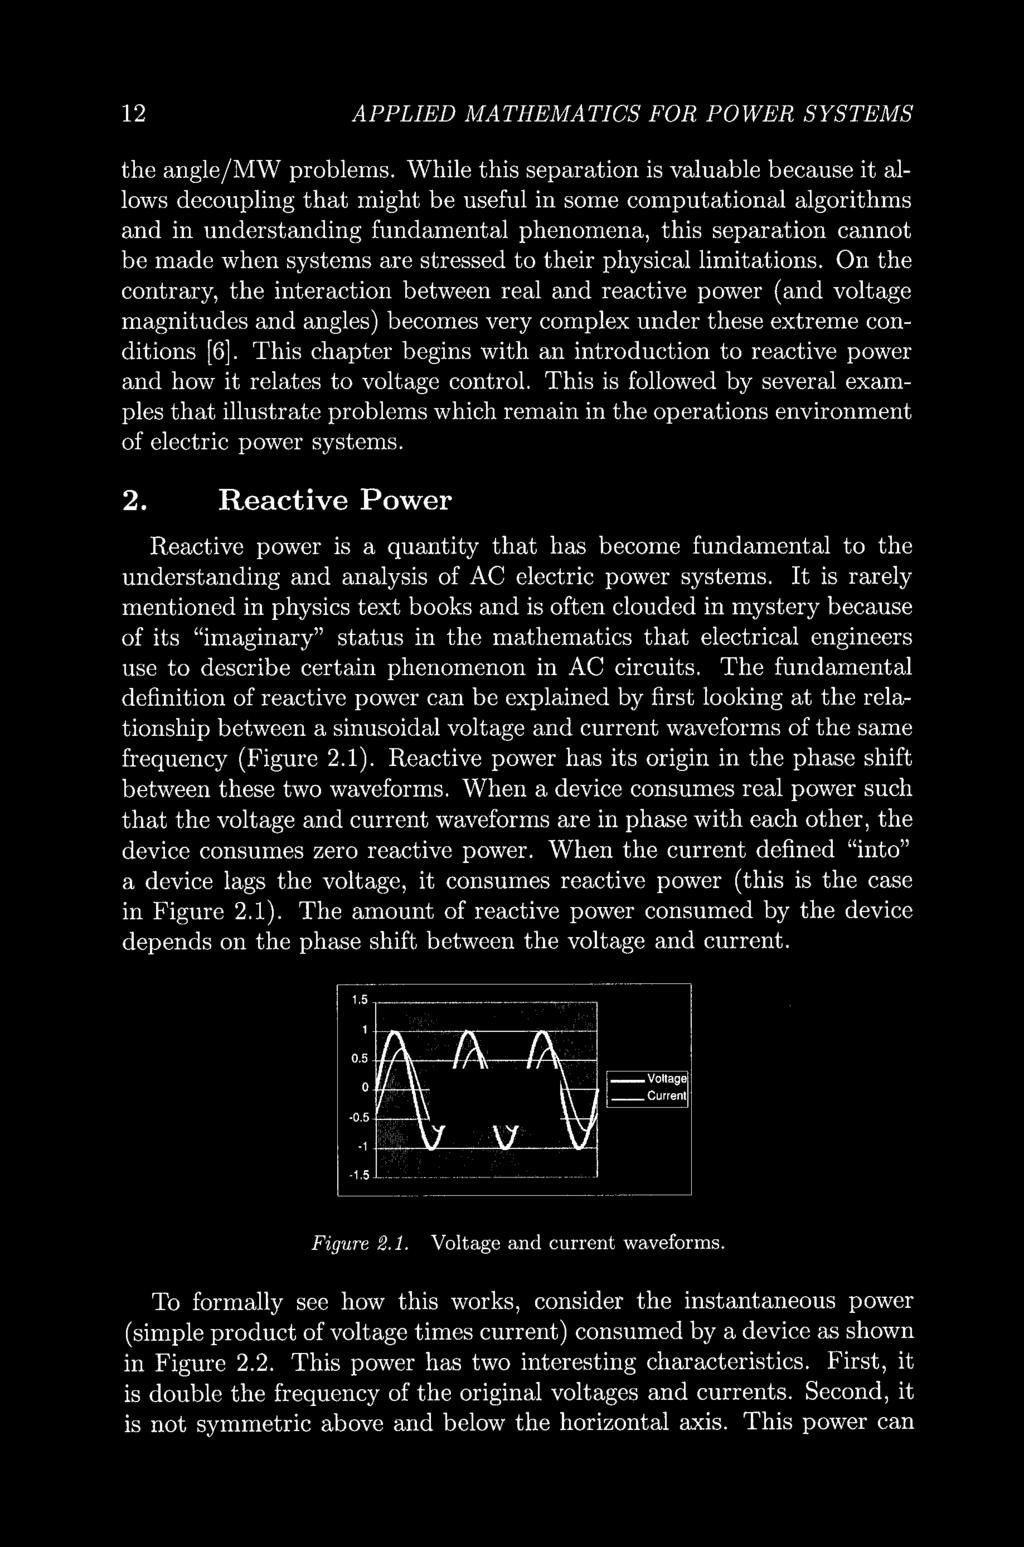 12 APPLIED MATHEMATICS FOR POWER SYSTEMS the angle/mw problems.